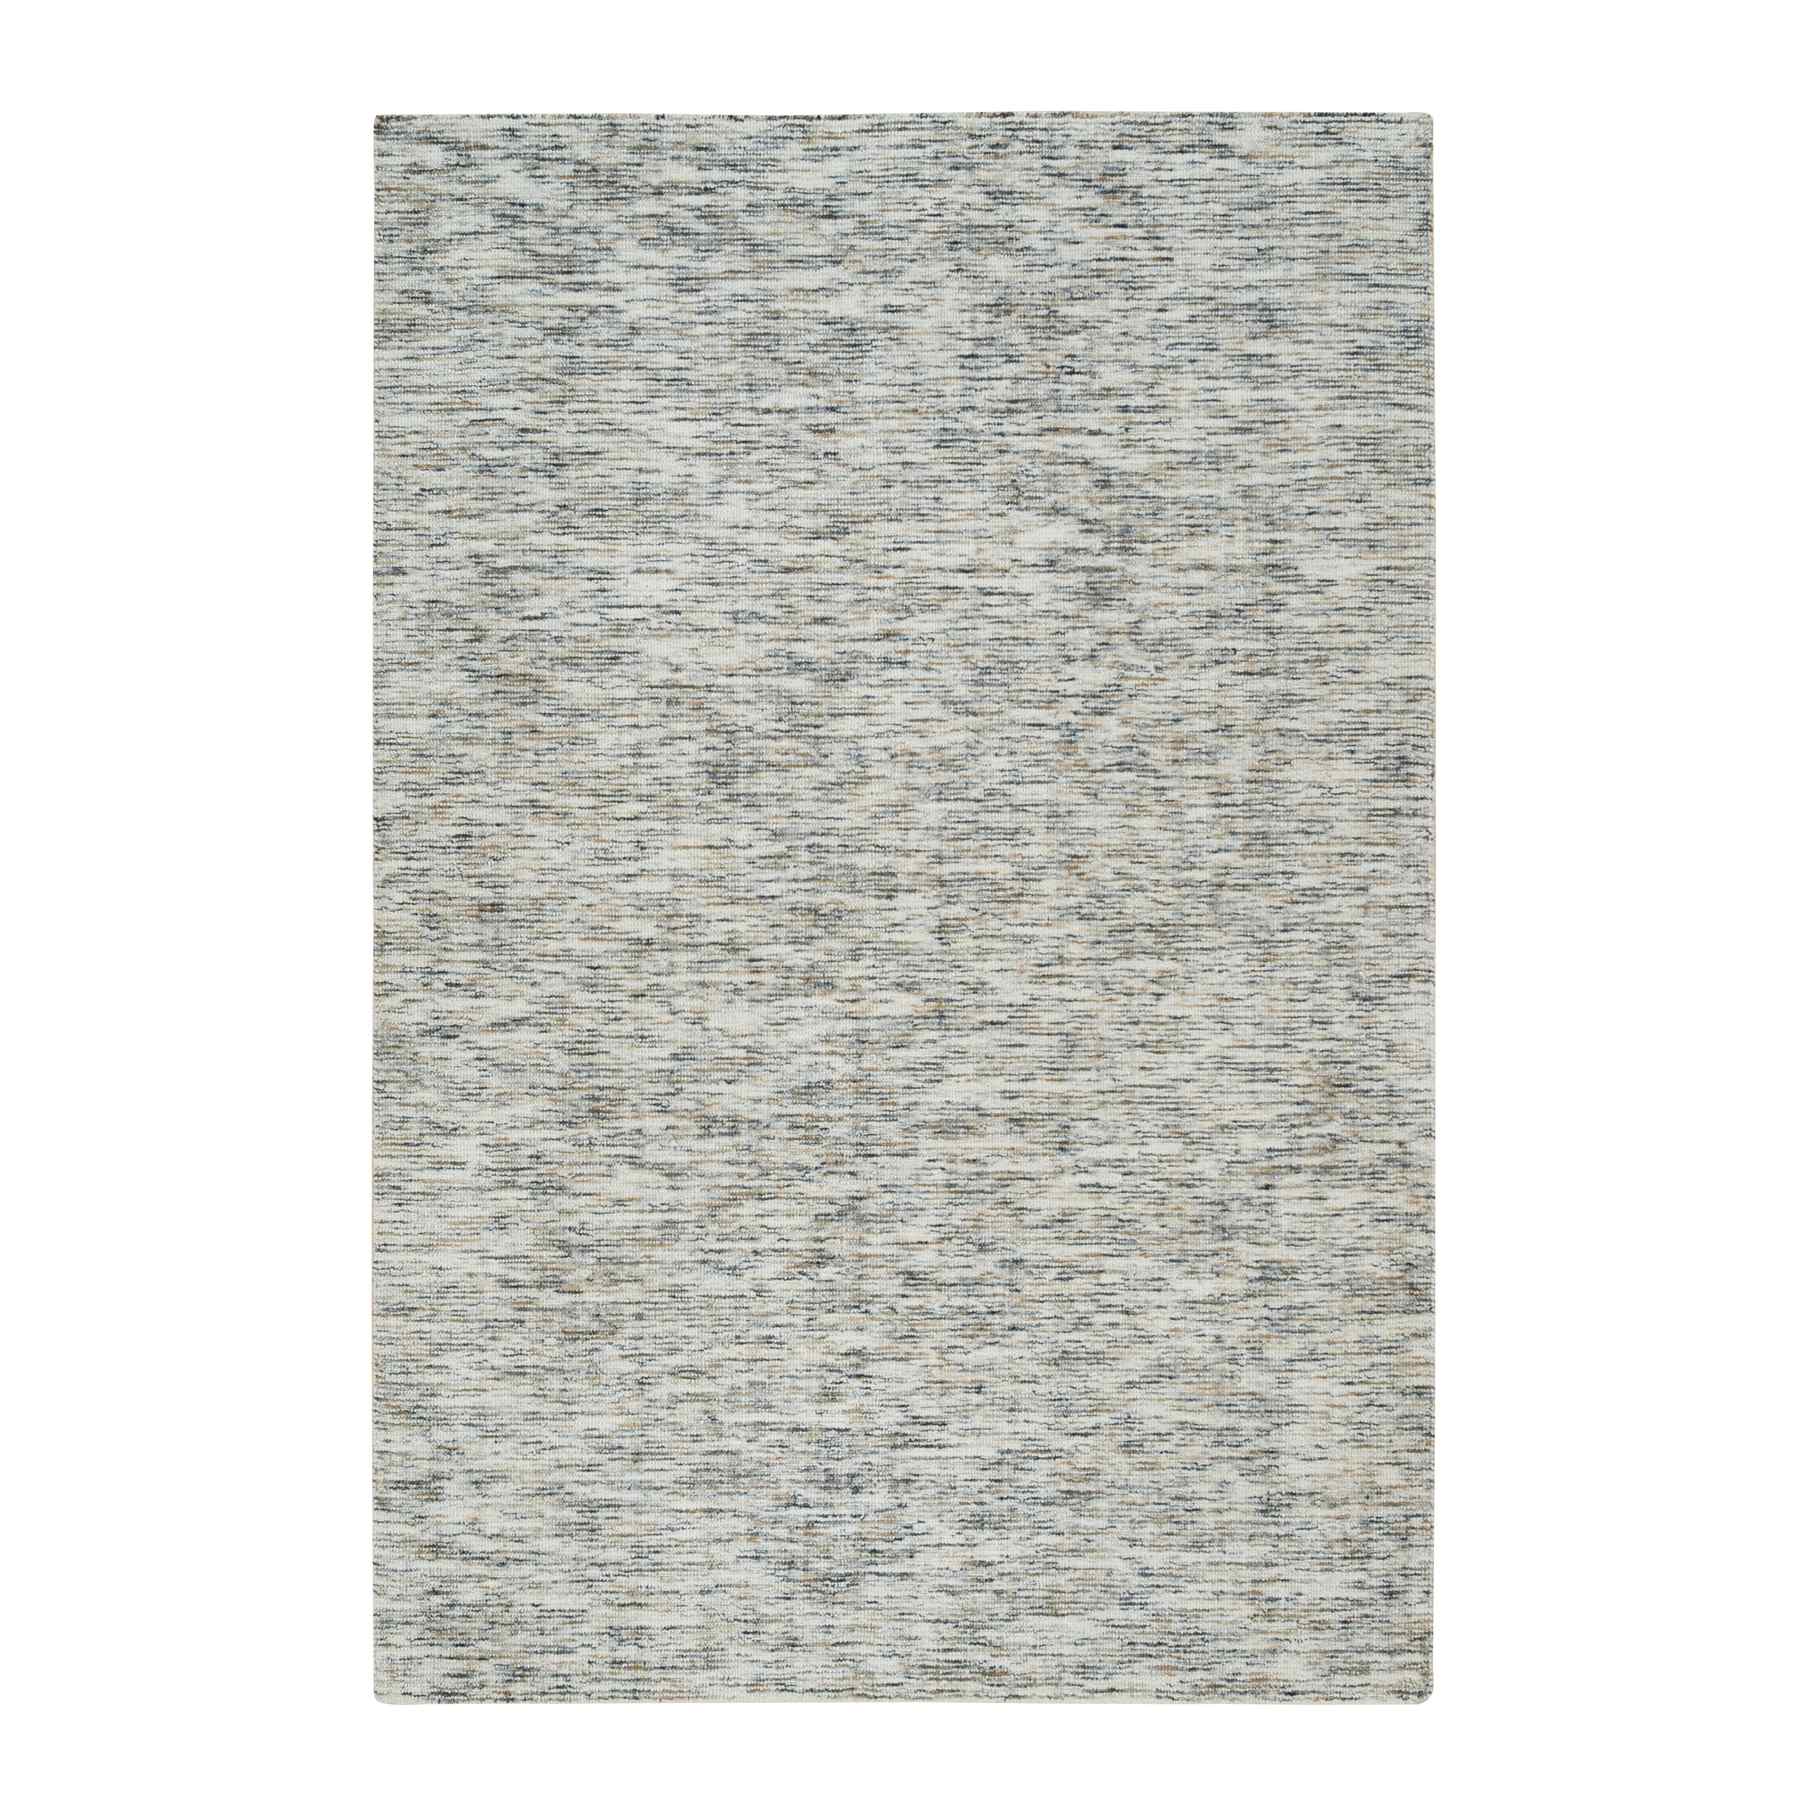 Earth Tone Colors, Hand Loomed Modern Striped Design Soft to the Touch Pure Wool Oriental Rug